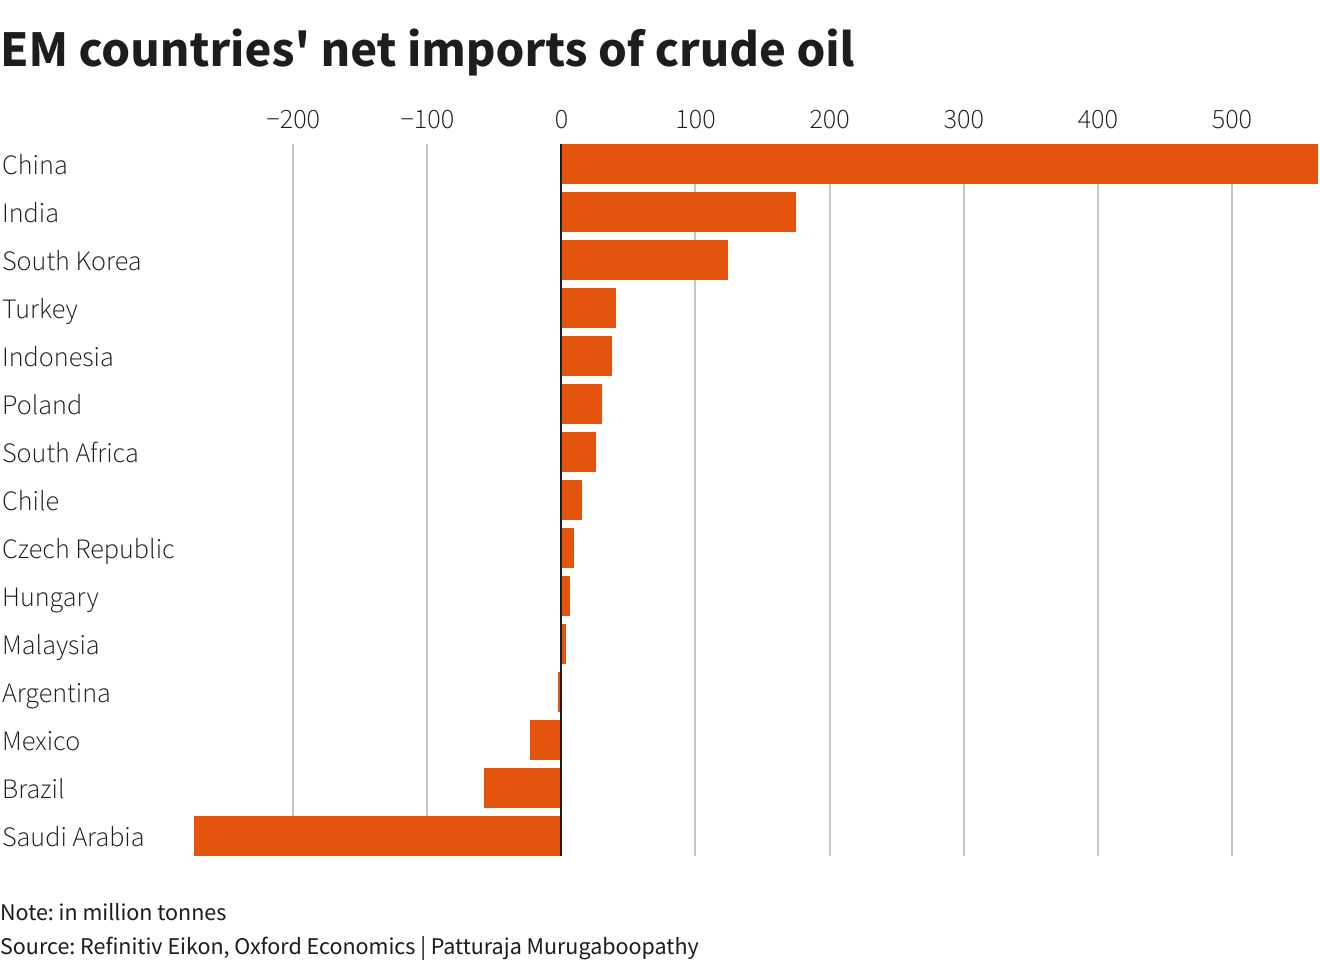 Net imports of crude oil from emerging countries